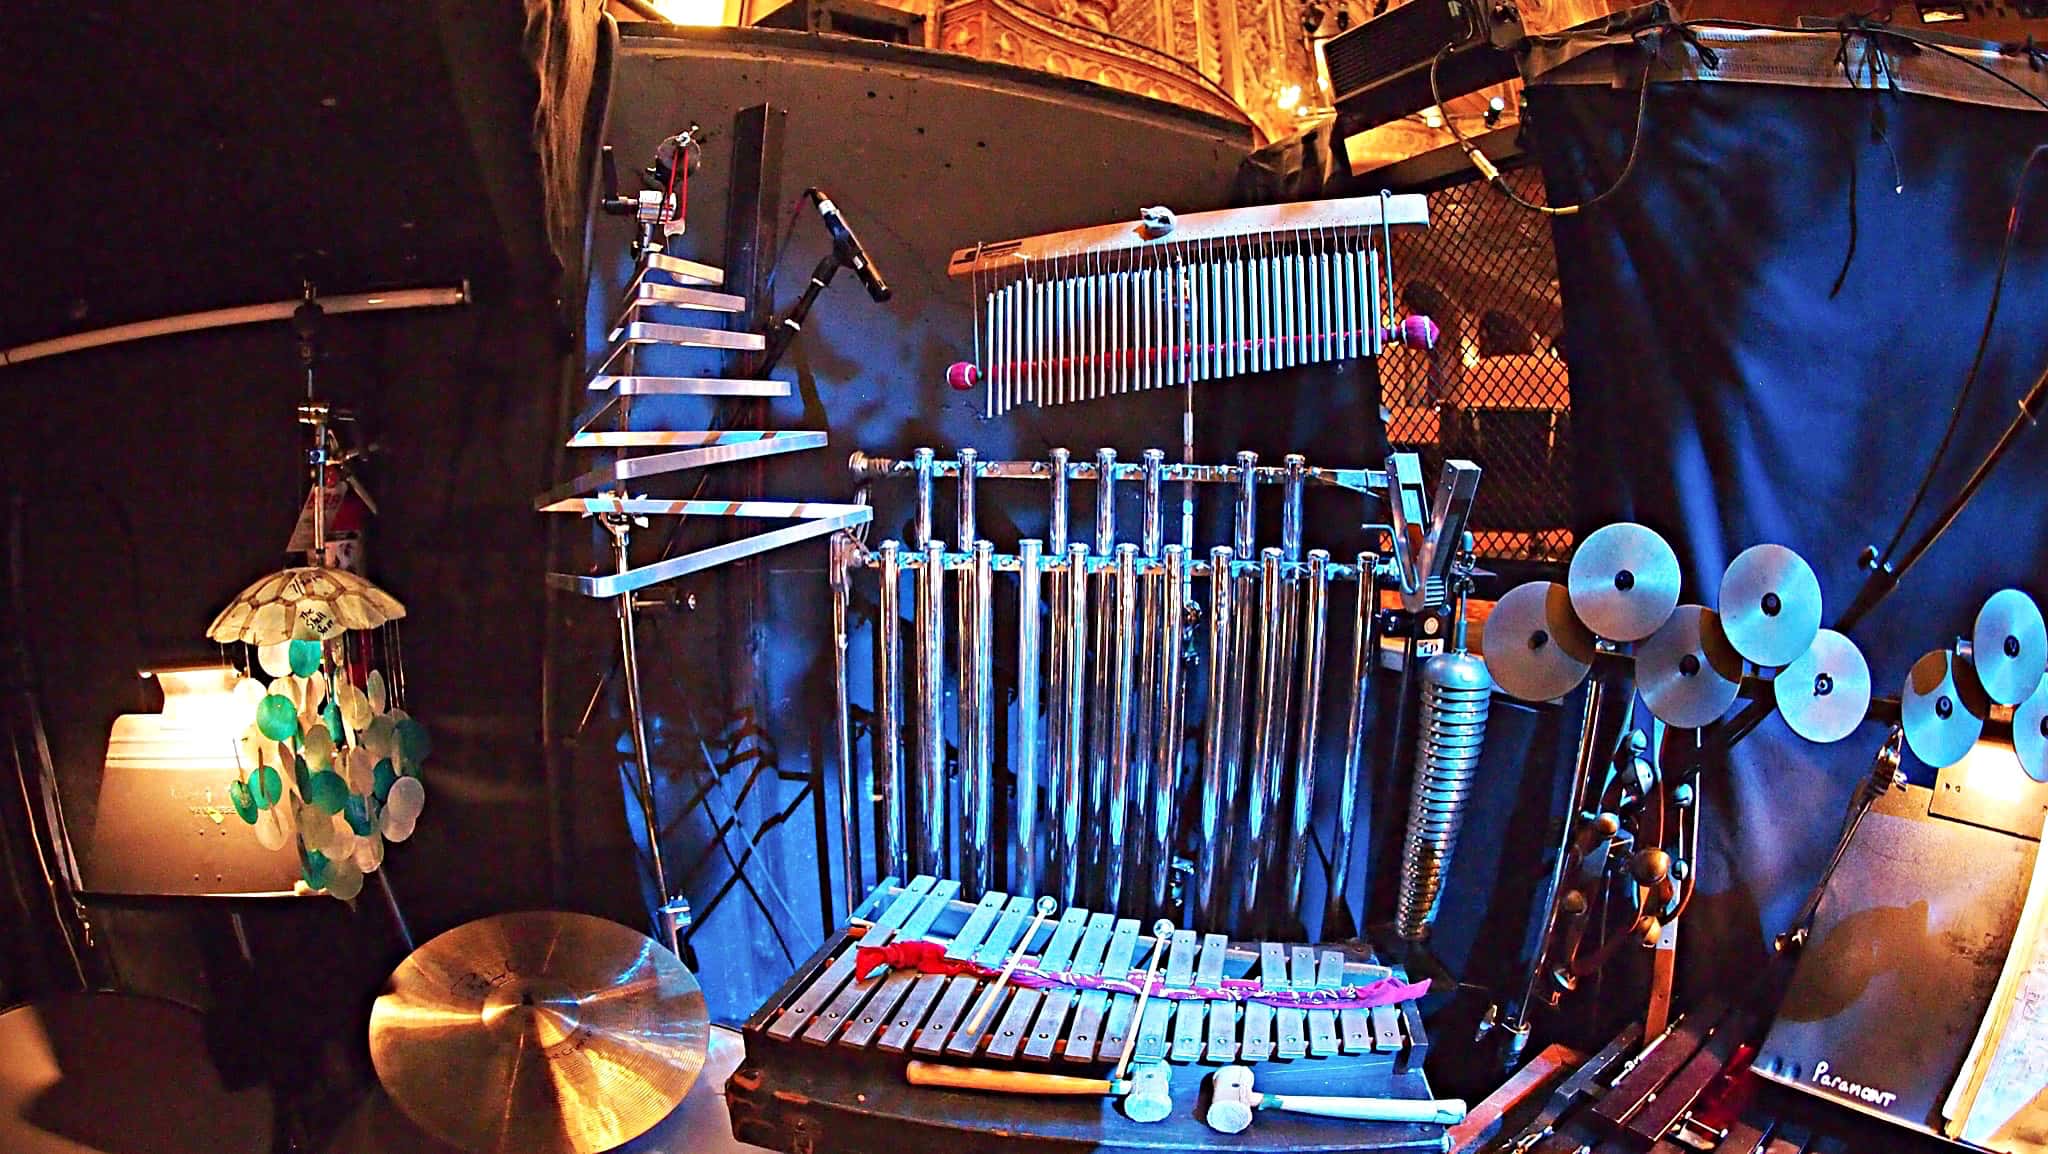 Paul Hansen’s percussion setup for the National Tour of Wicked at the Paramount Theater in Seattle, Washington.